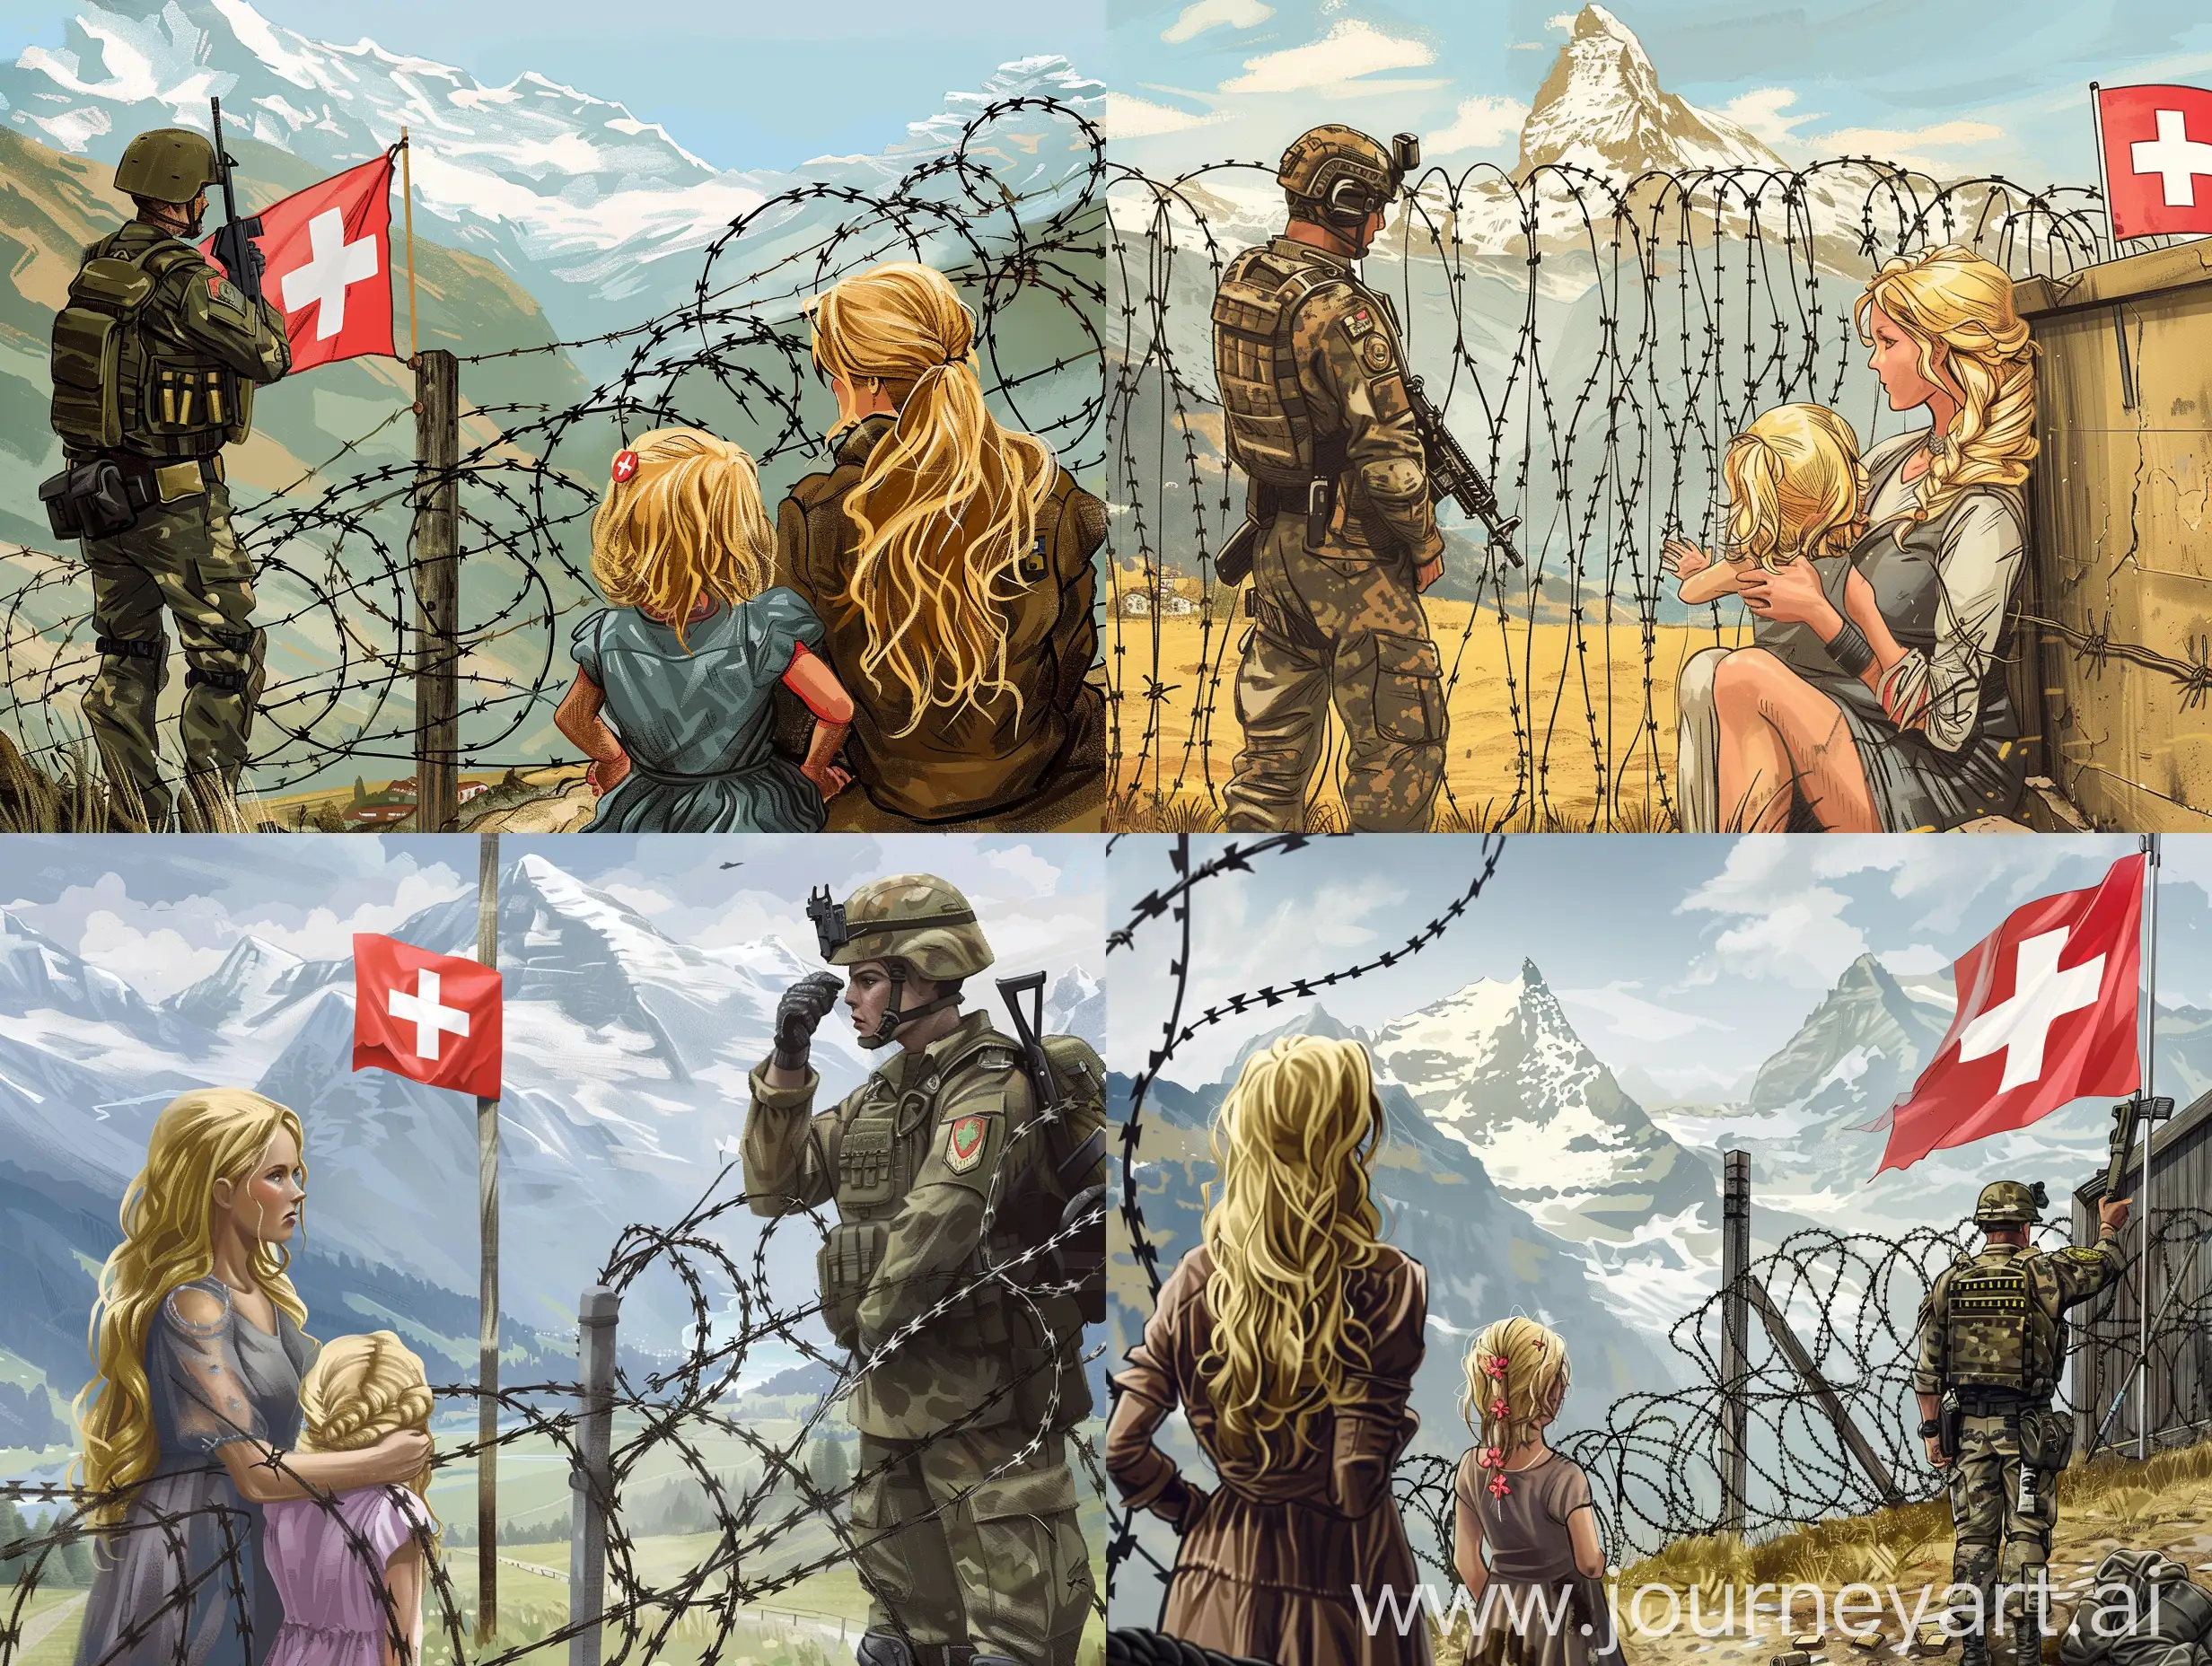 Illegal-Immigration-Blonde-Mother-and-Daughter-Confronted-by-Swiss-Soldier-at-Border-Fence